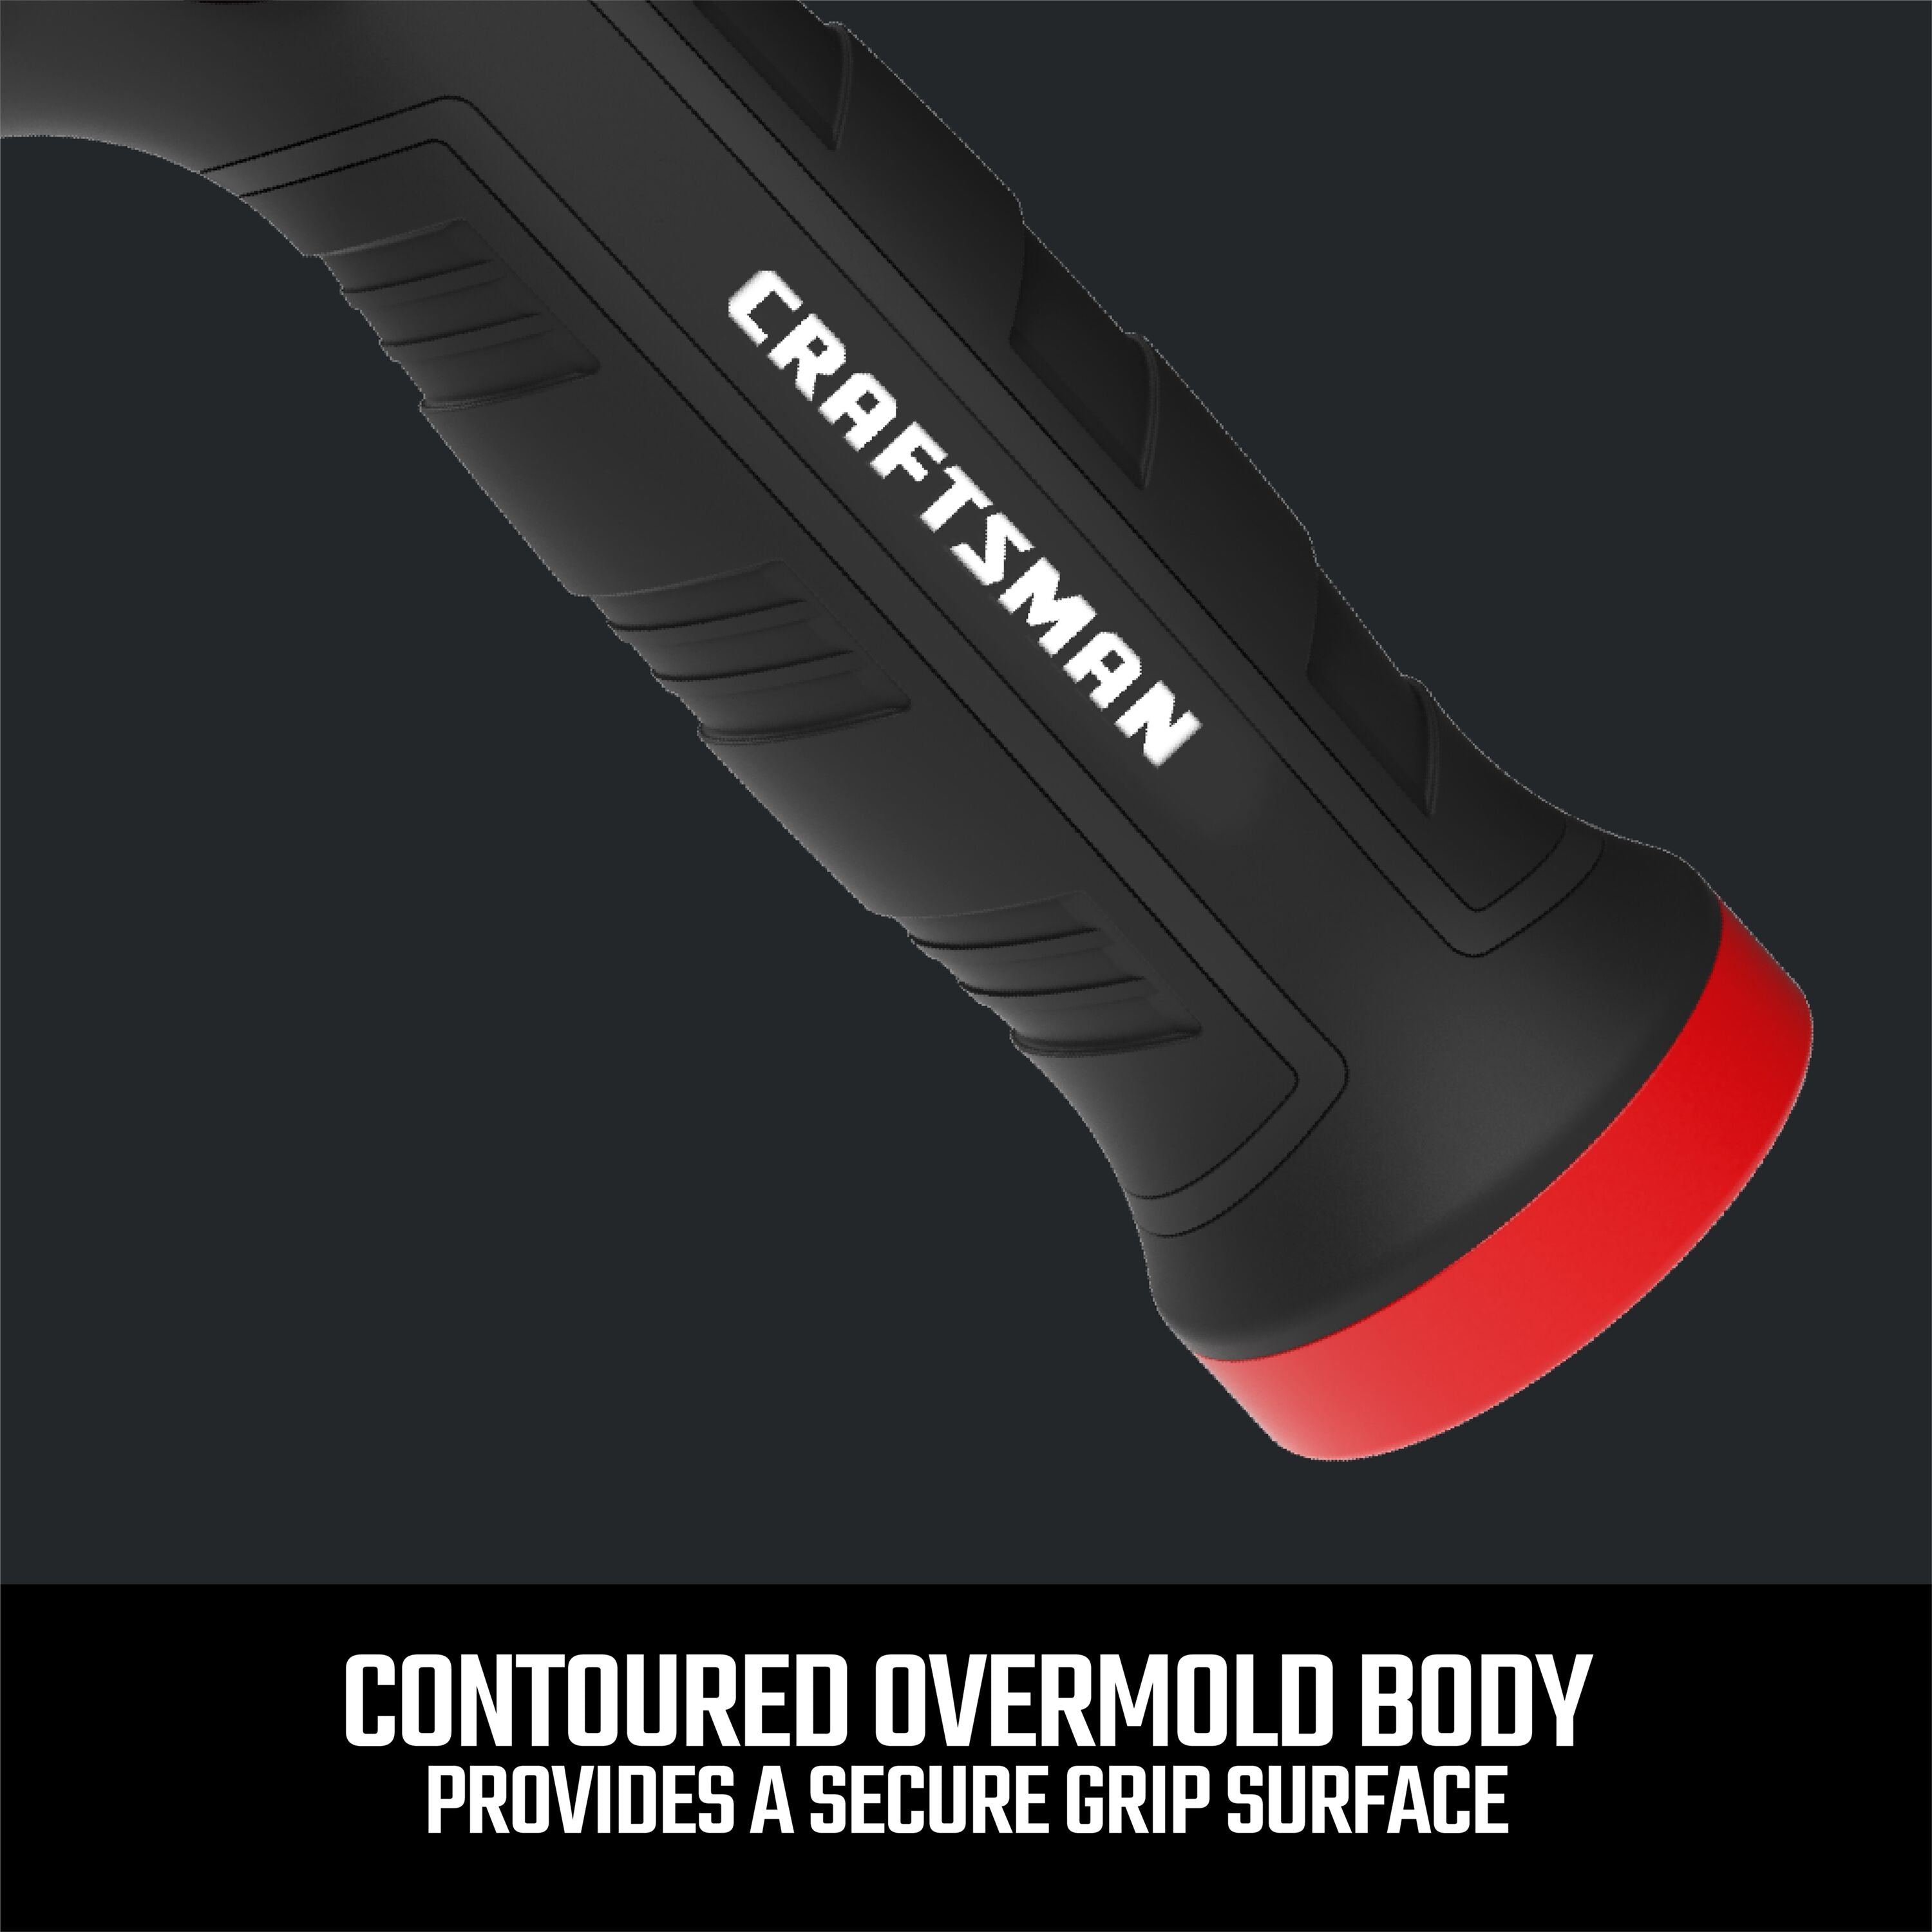 Black and red ultimate 7-pattern water nozzle with thumb control. Highlighting the contoured over-mold body graphic